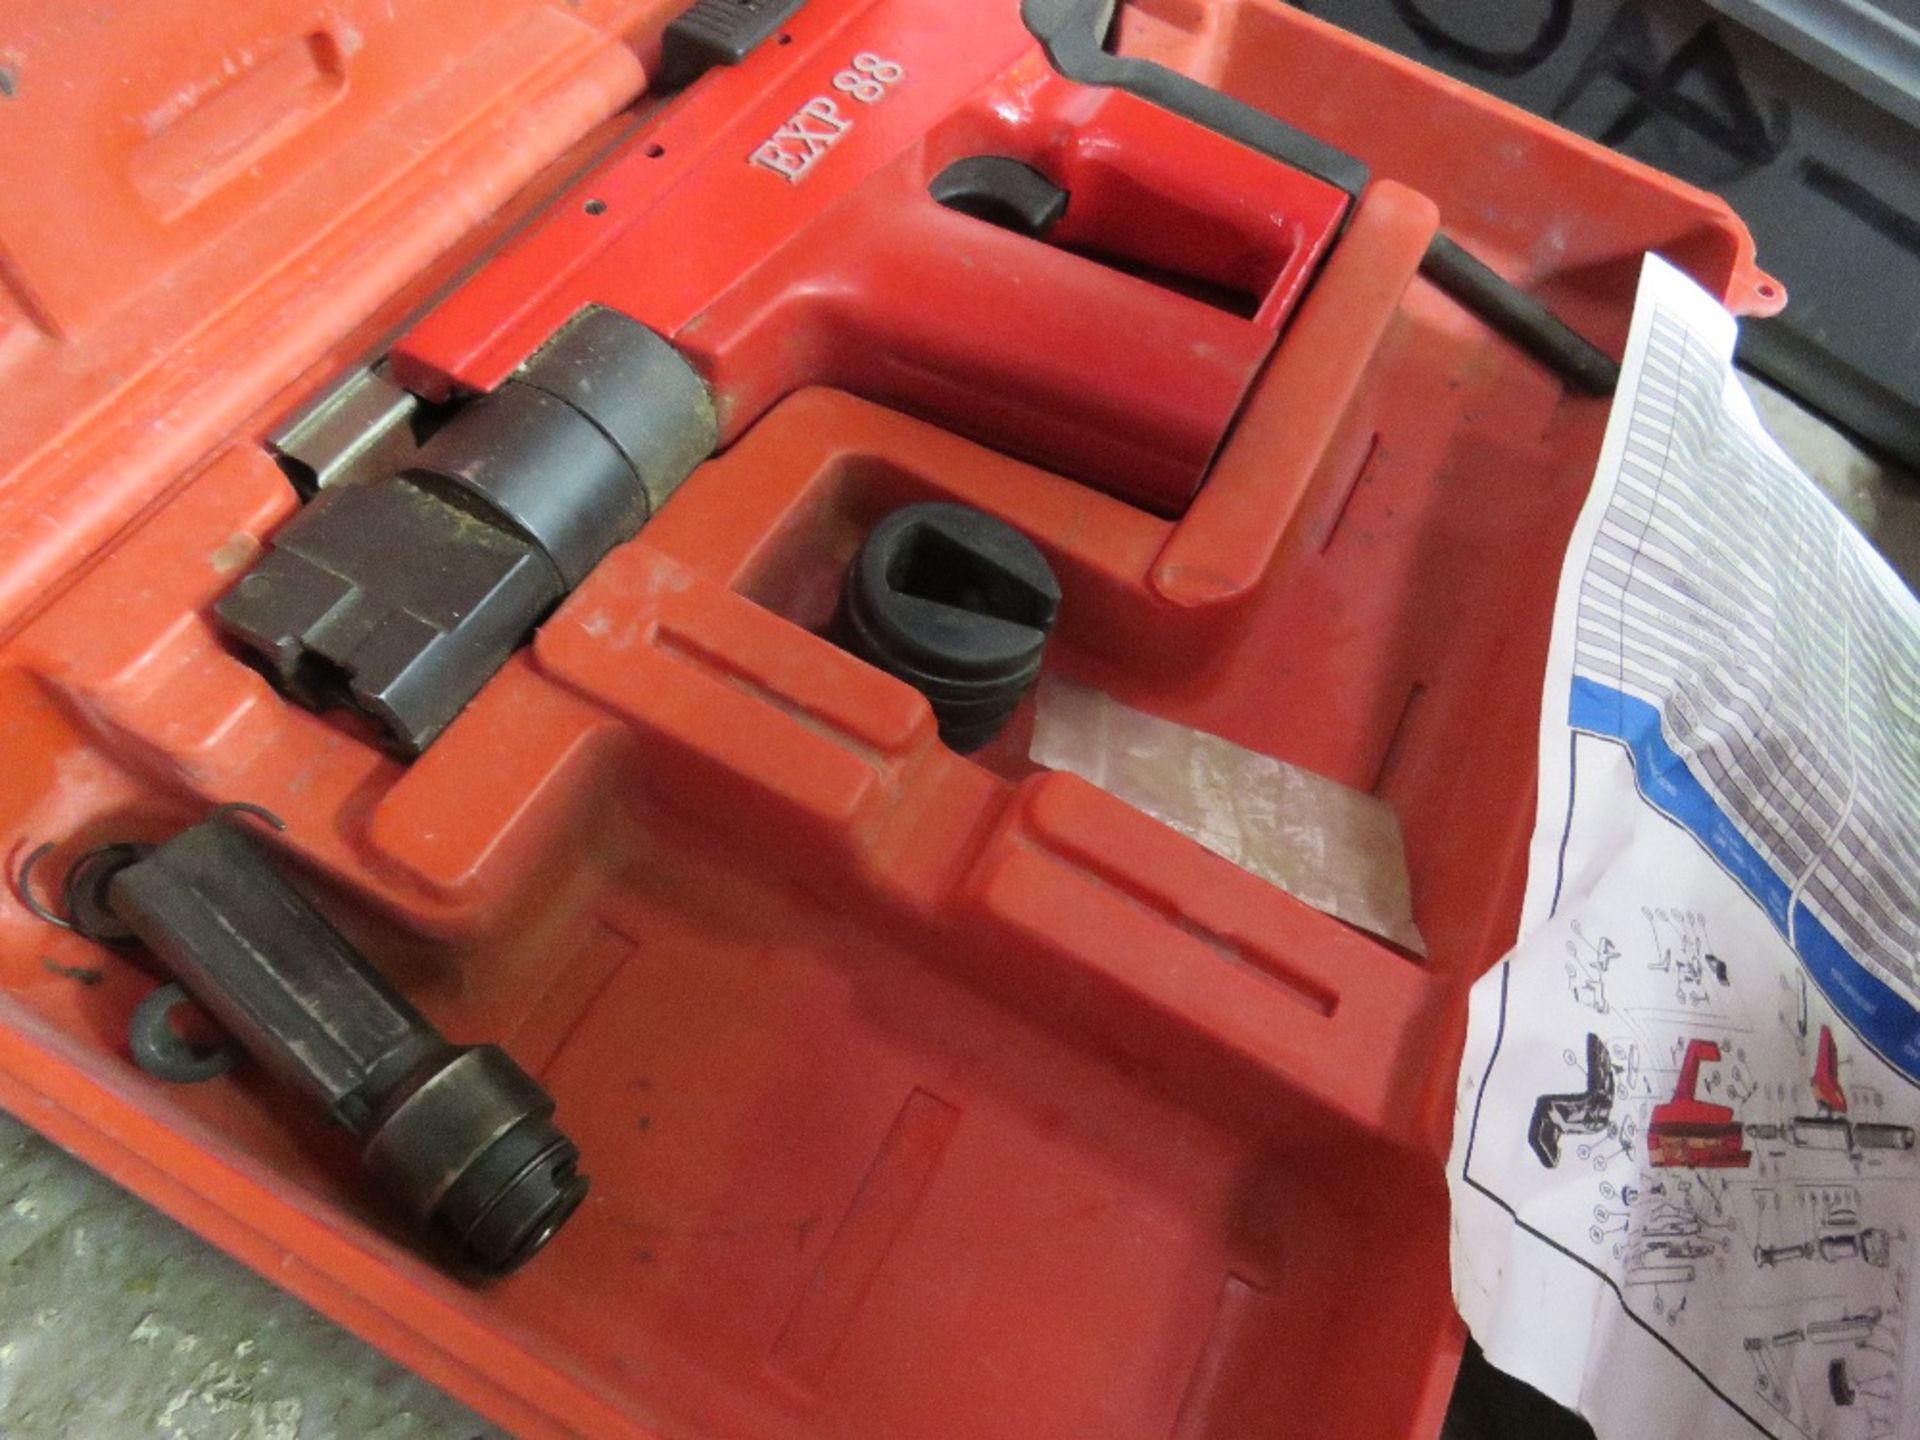 PERCUSSION NAIL GUN SOURCED FROM DEPOT CLEARANCE. - Image 2 of 2